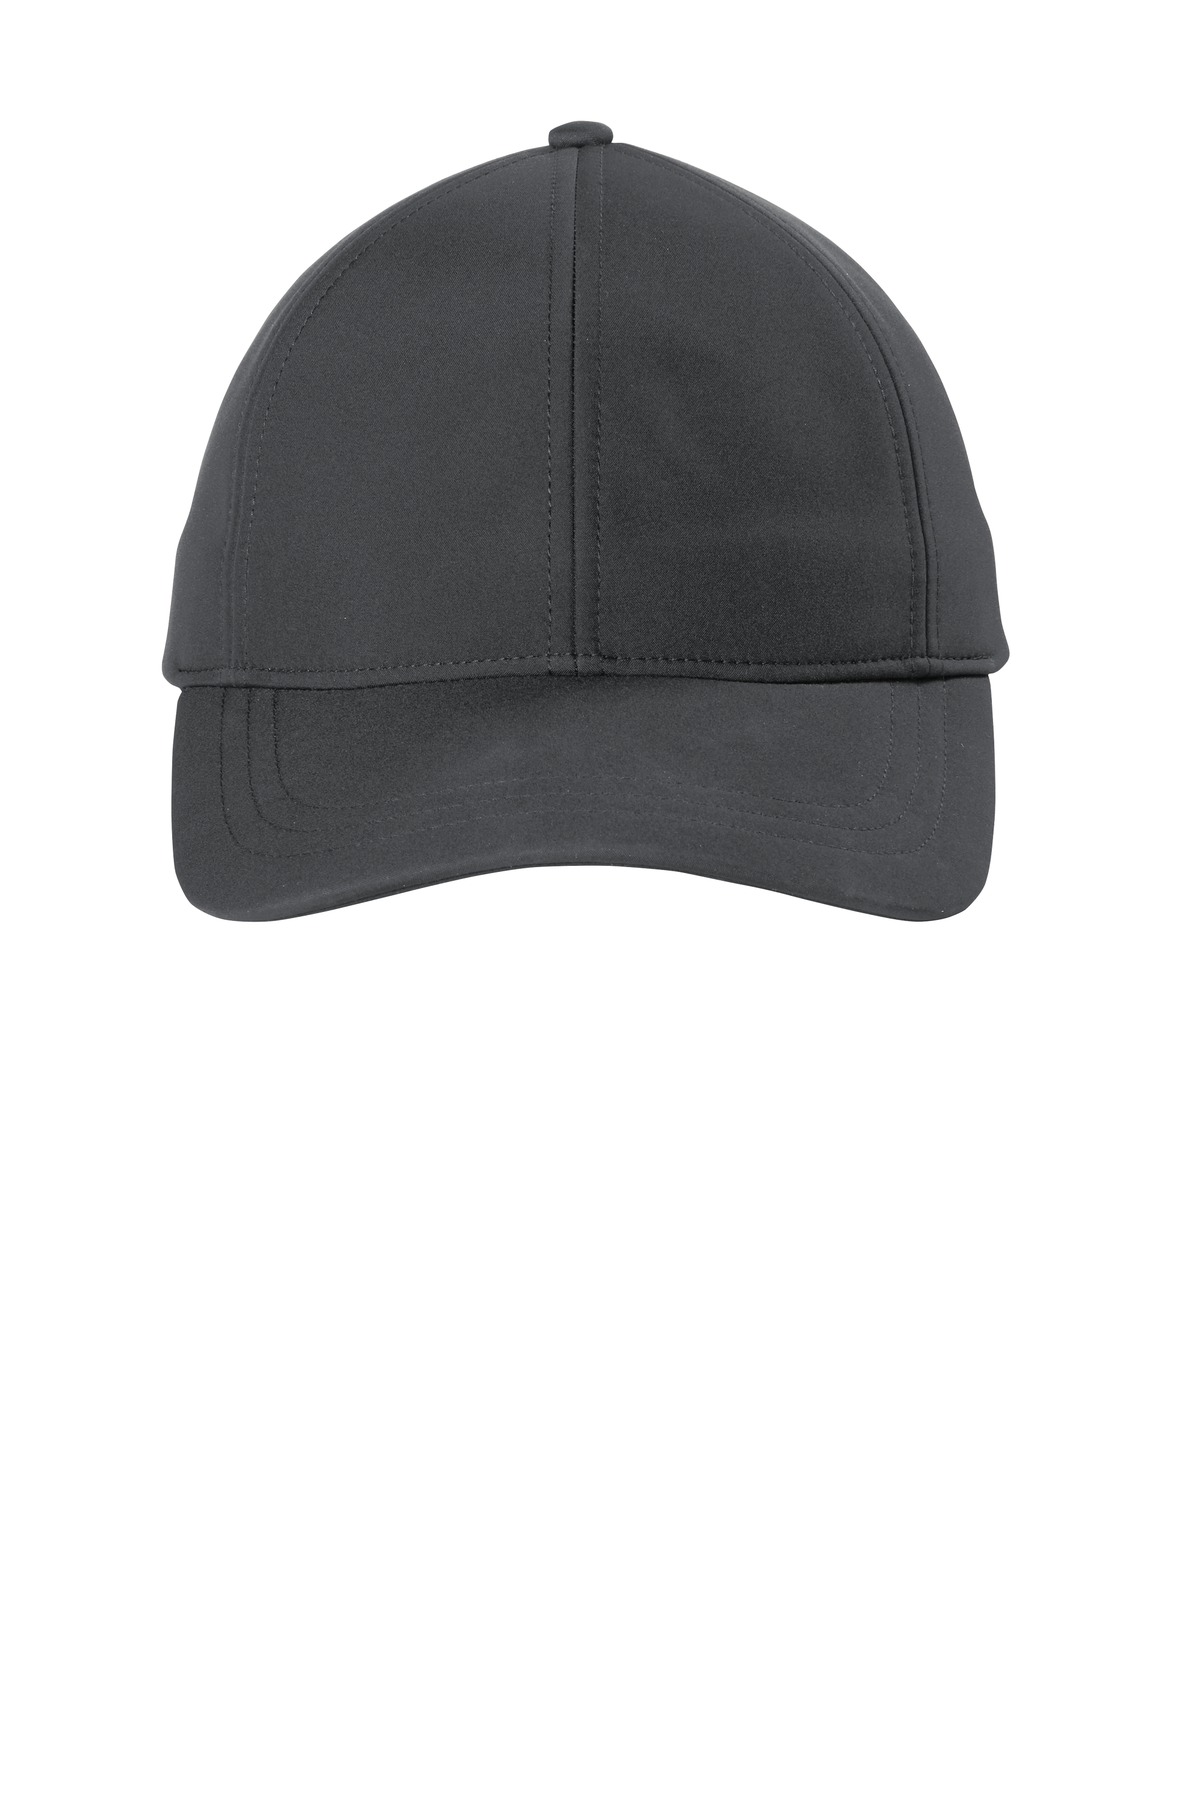 Port Authority Cold-Weather Core Soft Shell Cap. C945